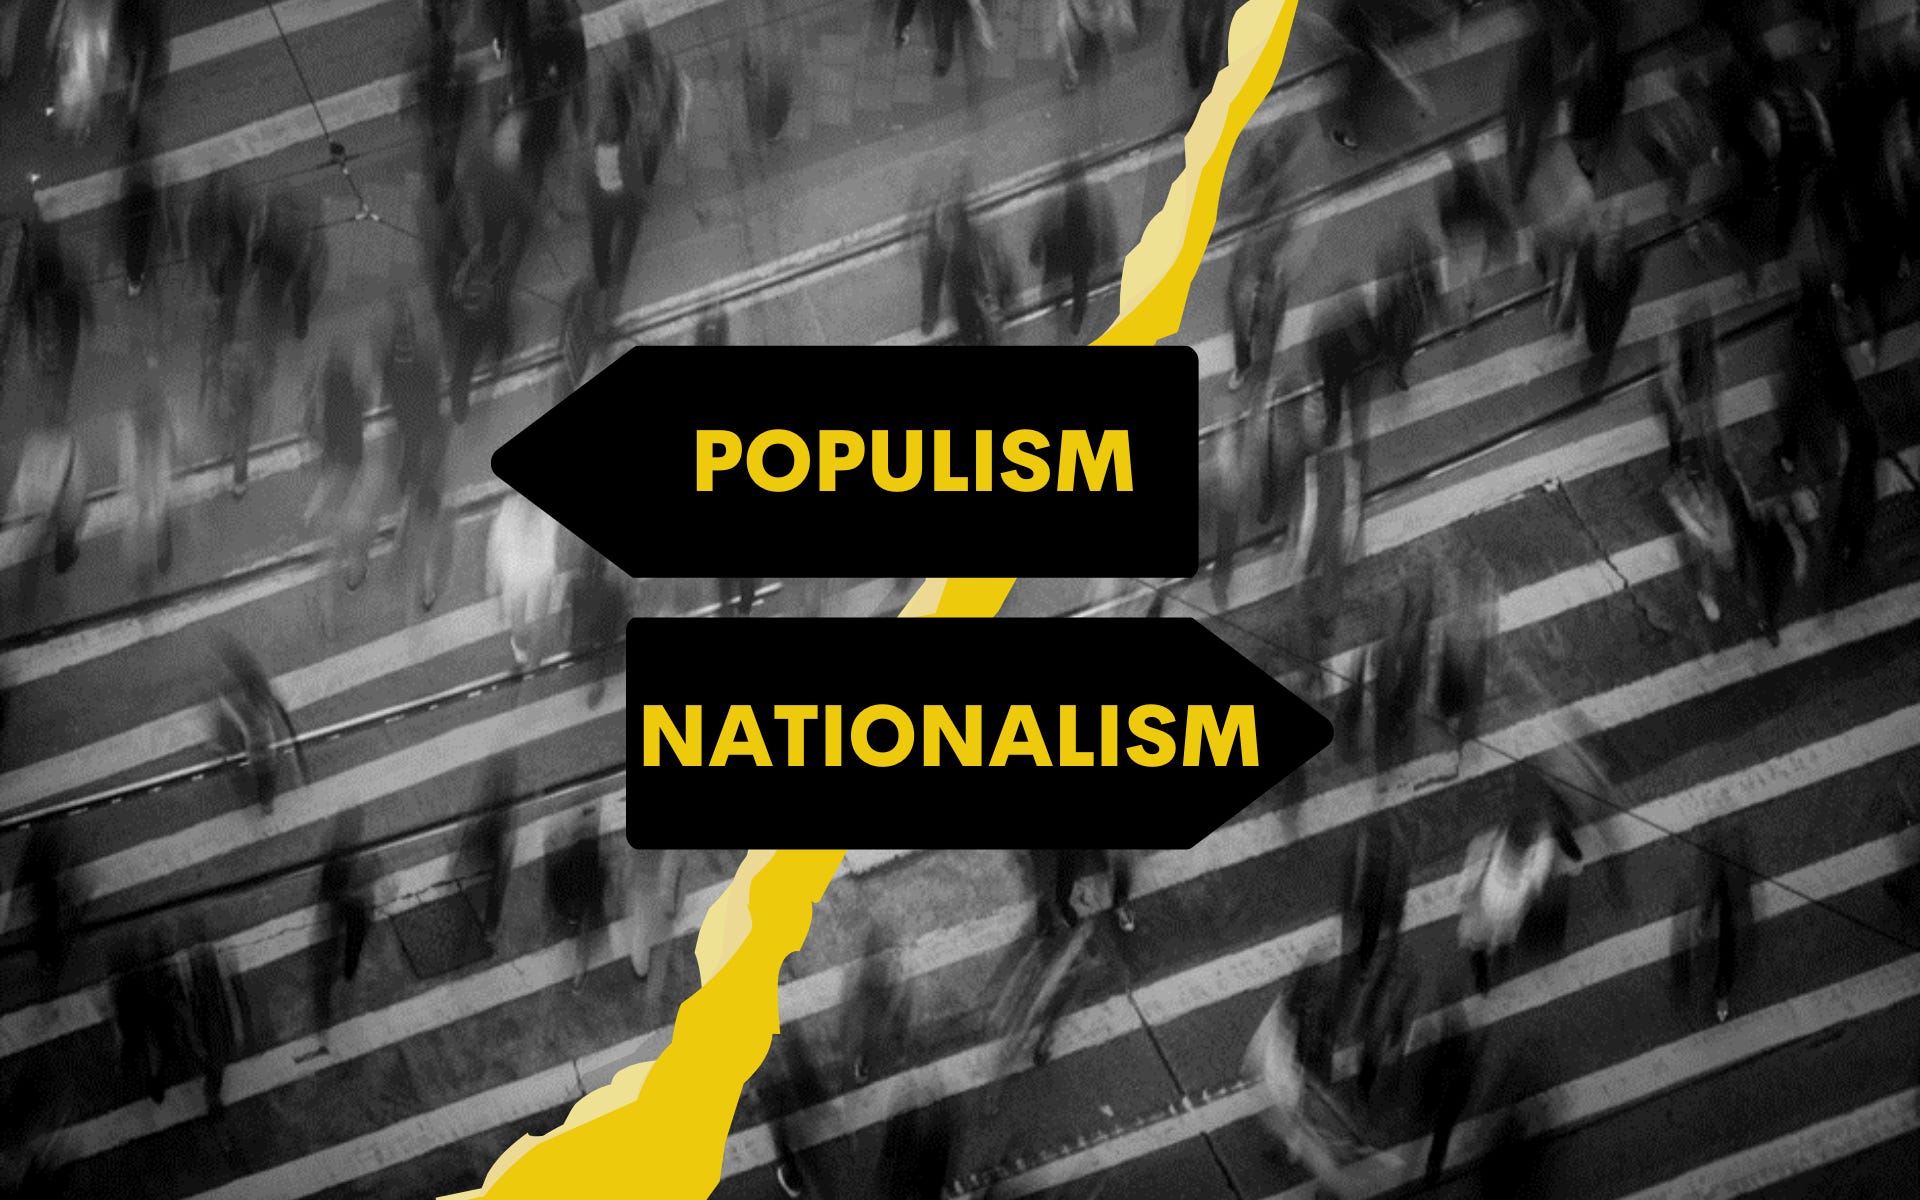 The Rise of Populist Nationalism